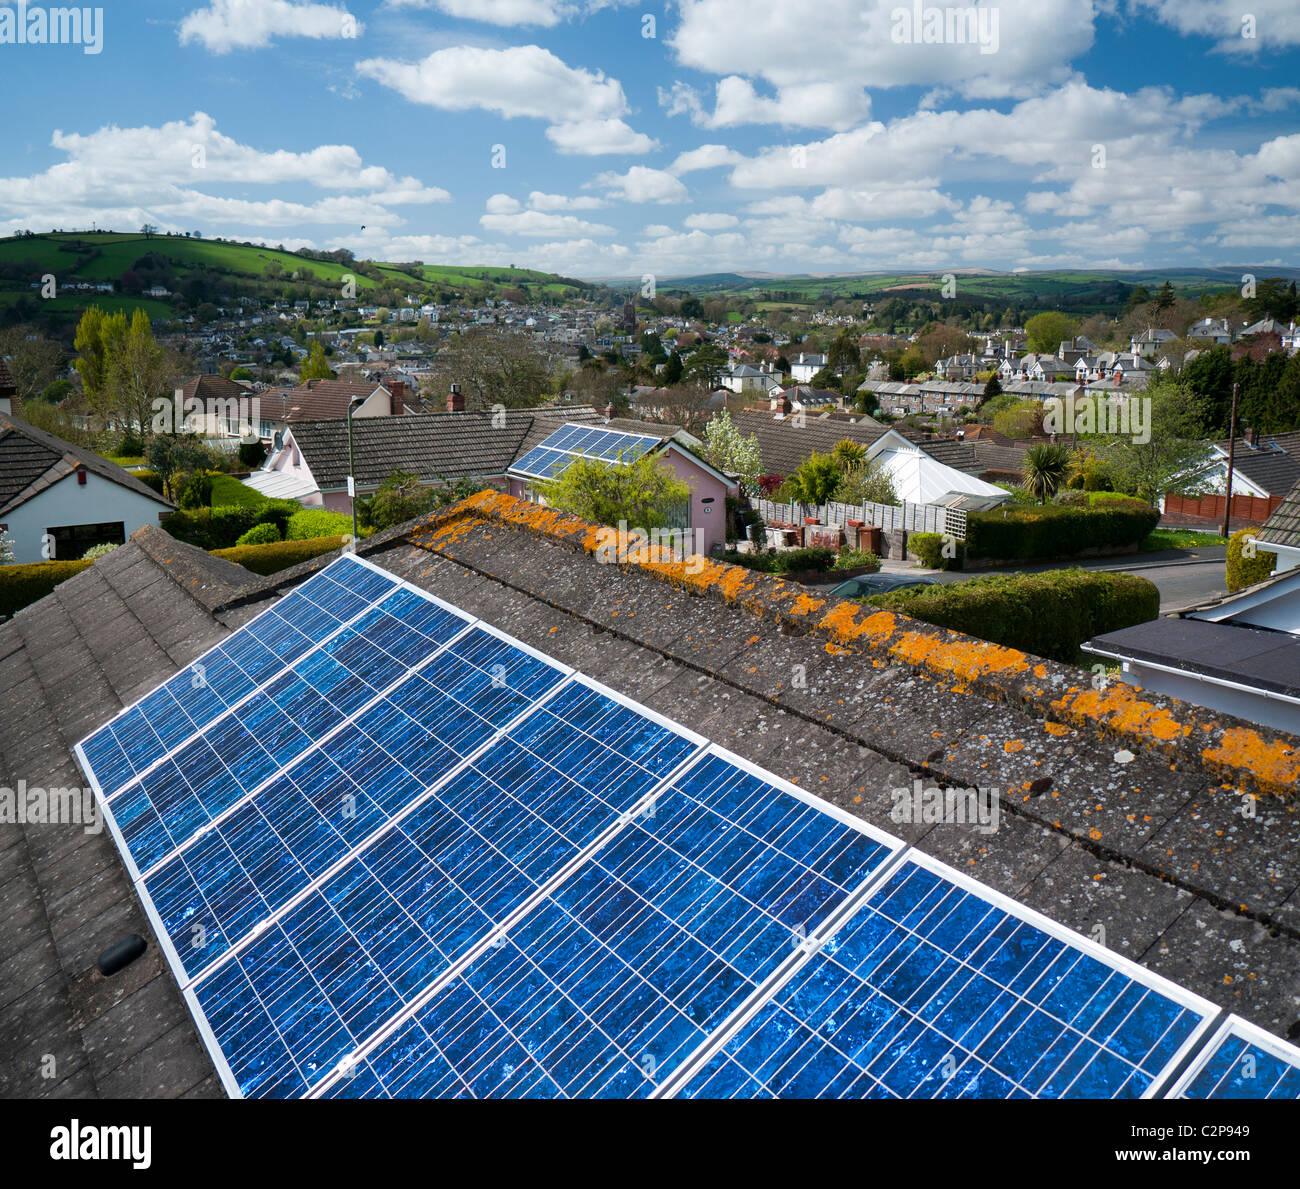 solar-panels-on-the-roof-of-a-house-in-t